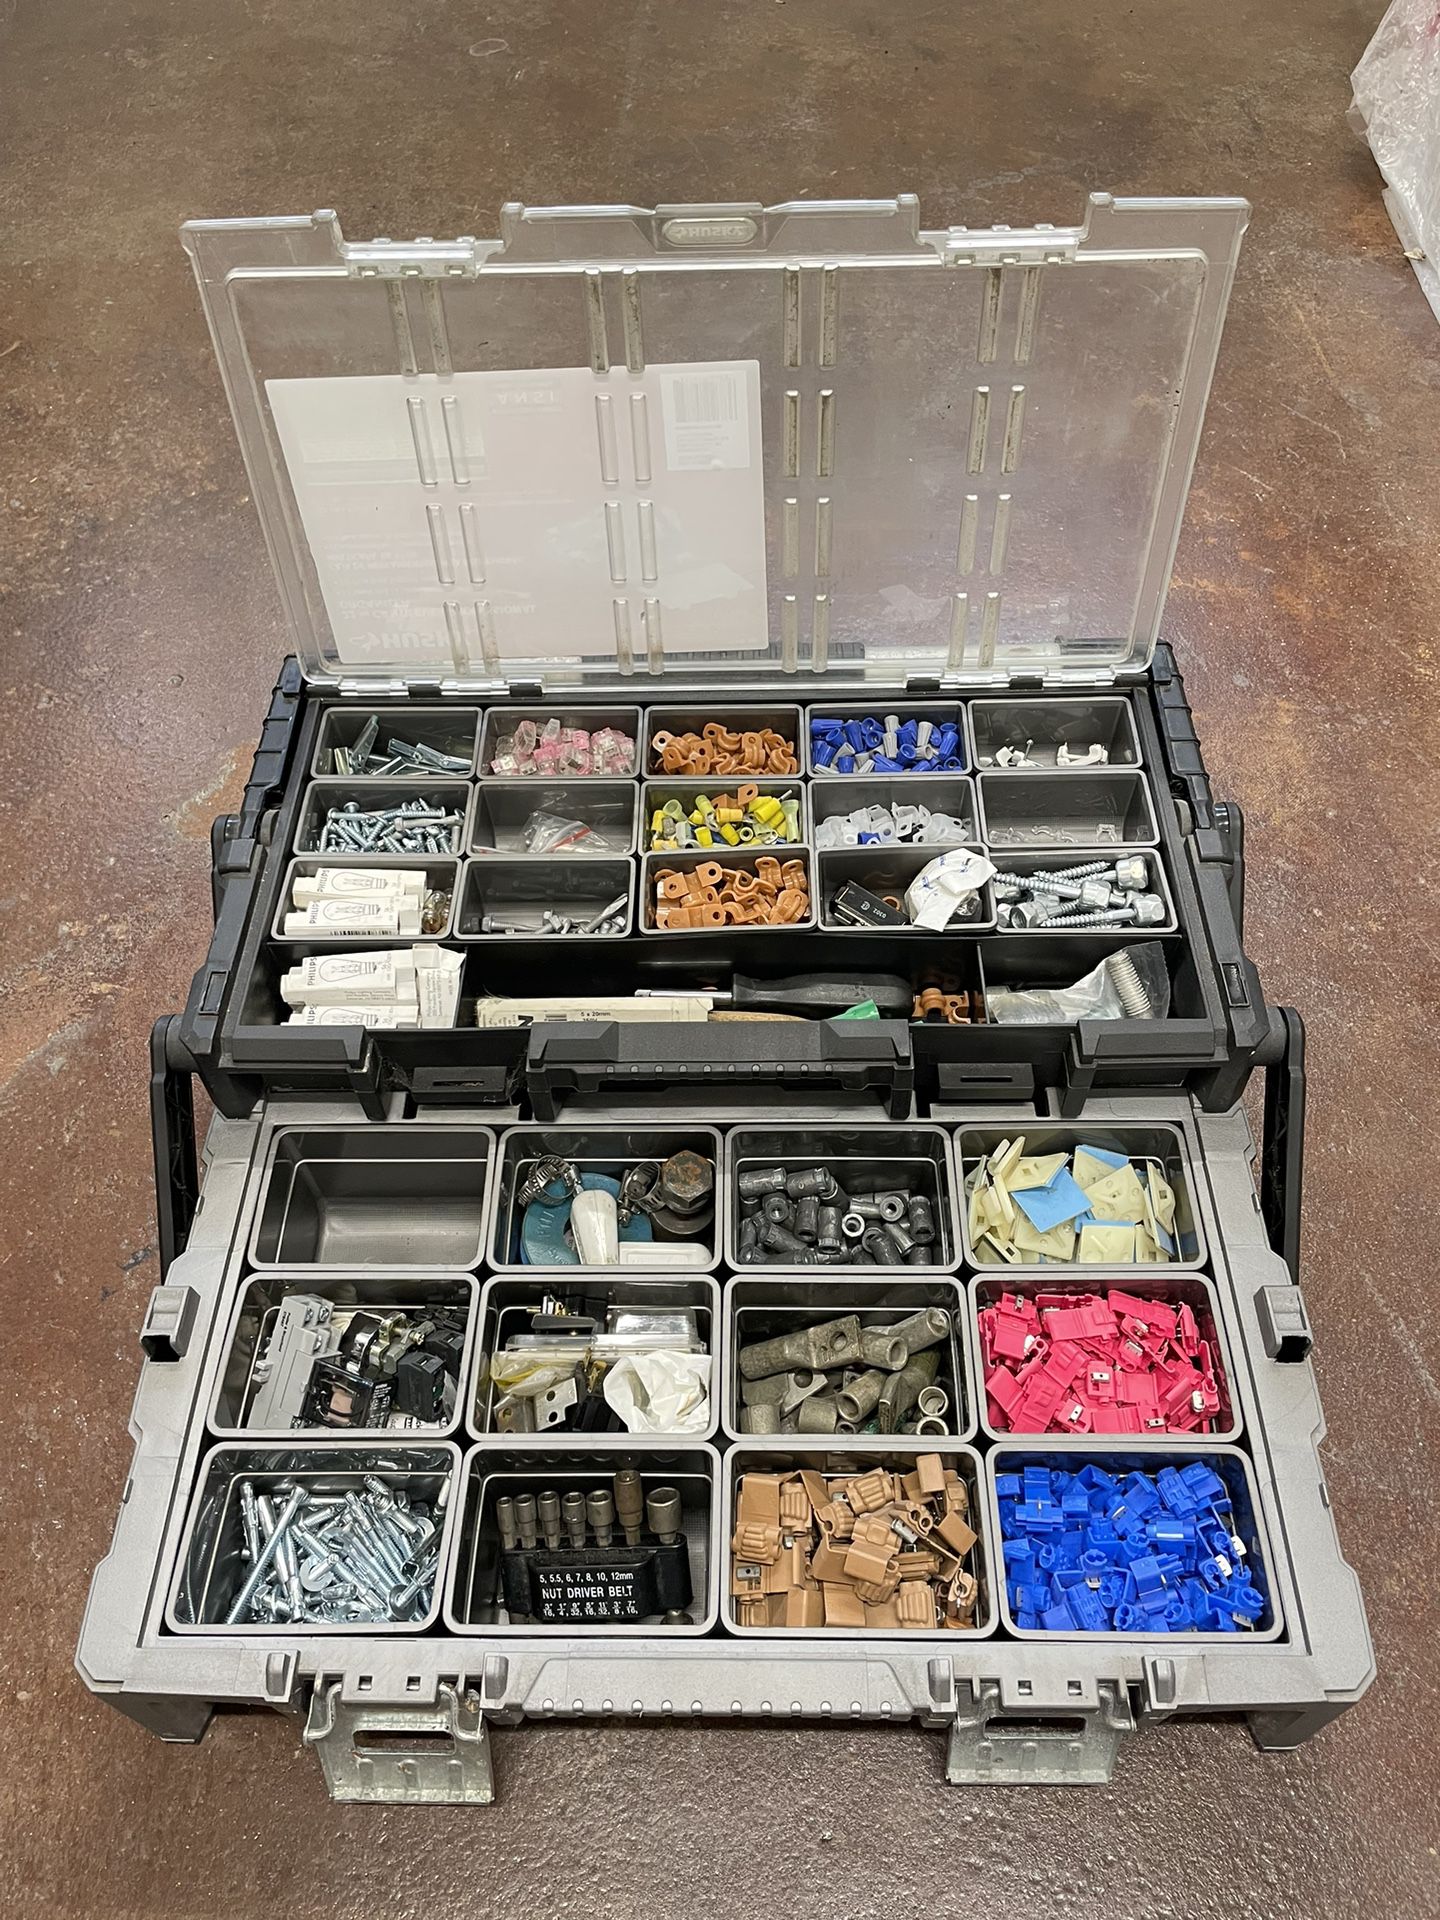 TOOL BOX WITH ELECTRCAL MATERIALS 